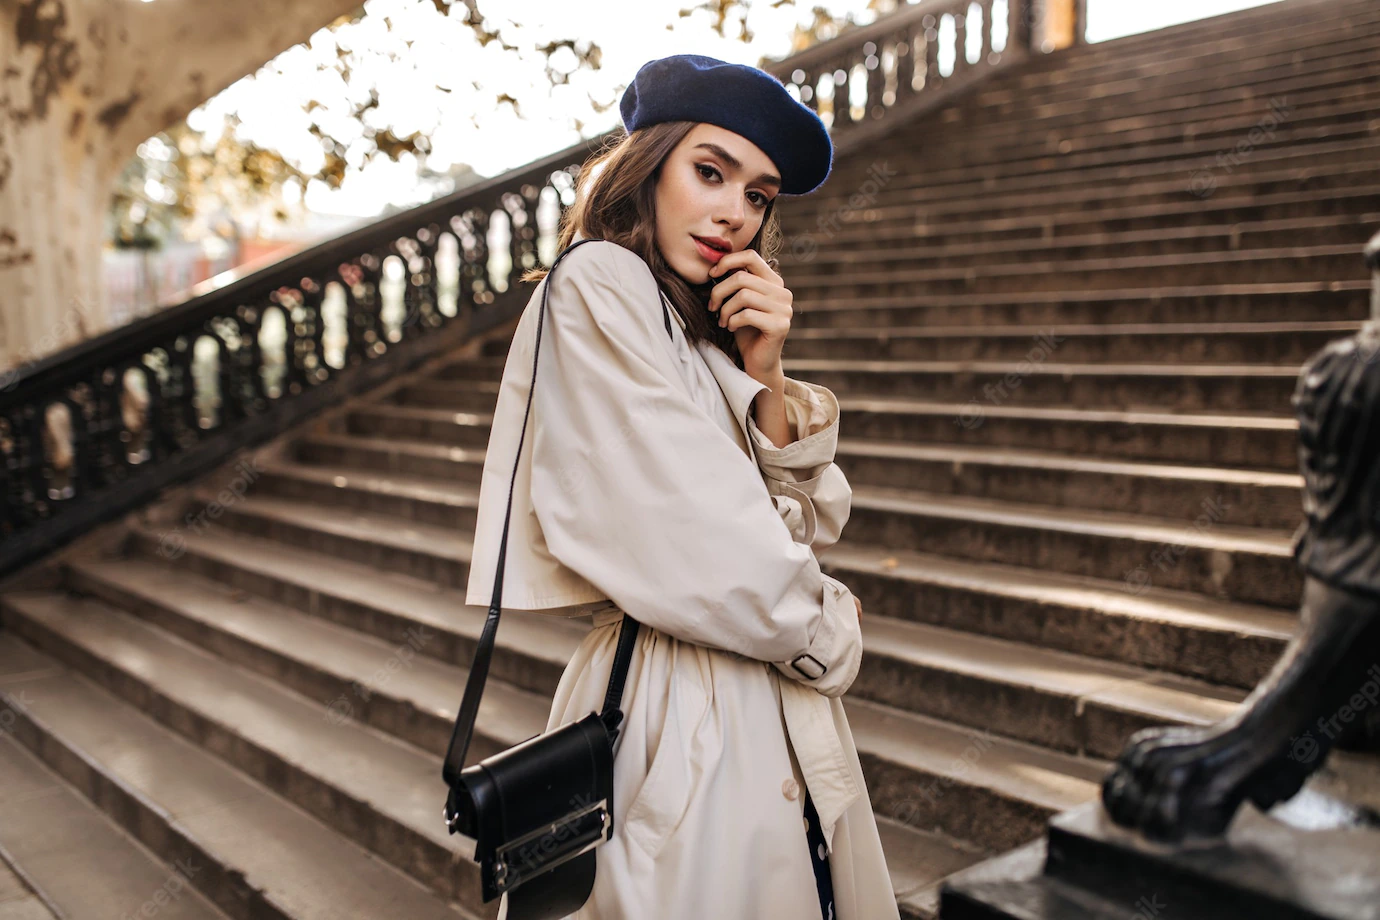 lovely-young-parisian-woman-with-brunette-hair-stylish-beret-beige-trench-coat-black-bag-standing-old-stairs-sensitively-posing-outdoors_197531-24472